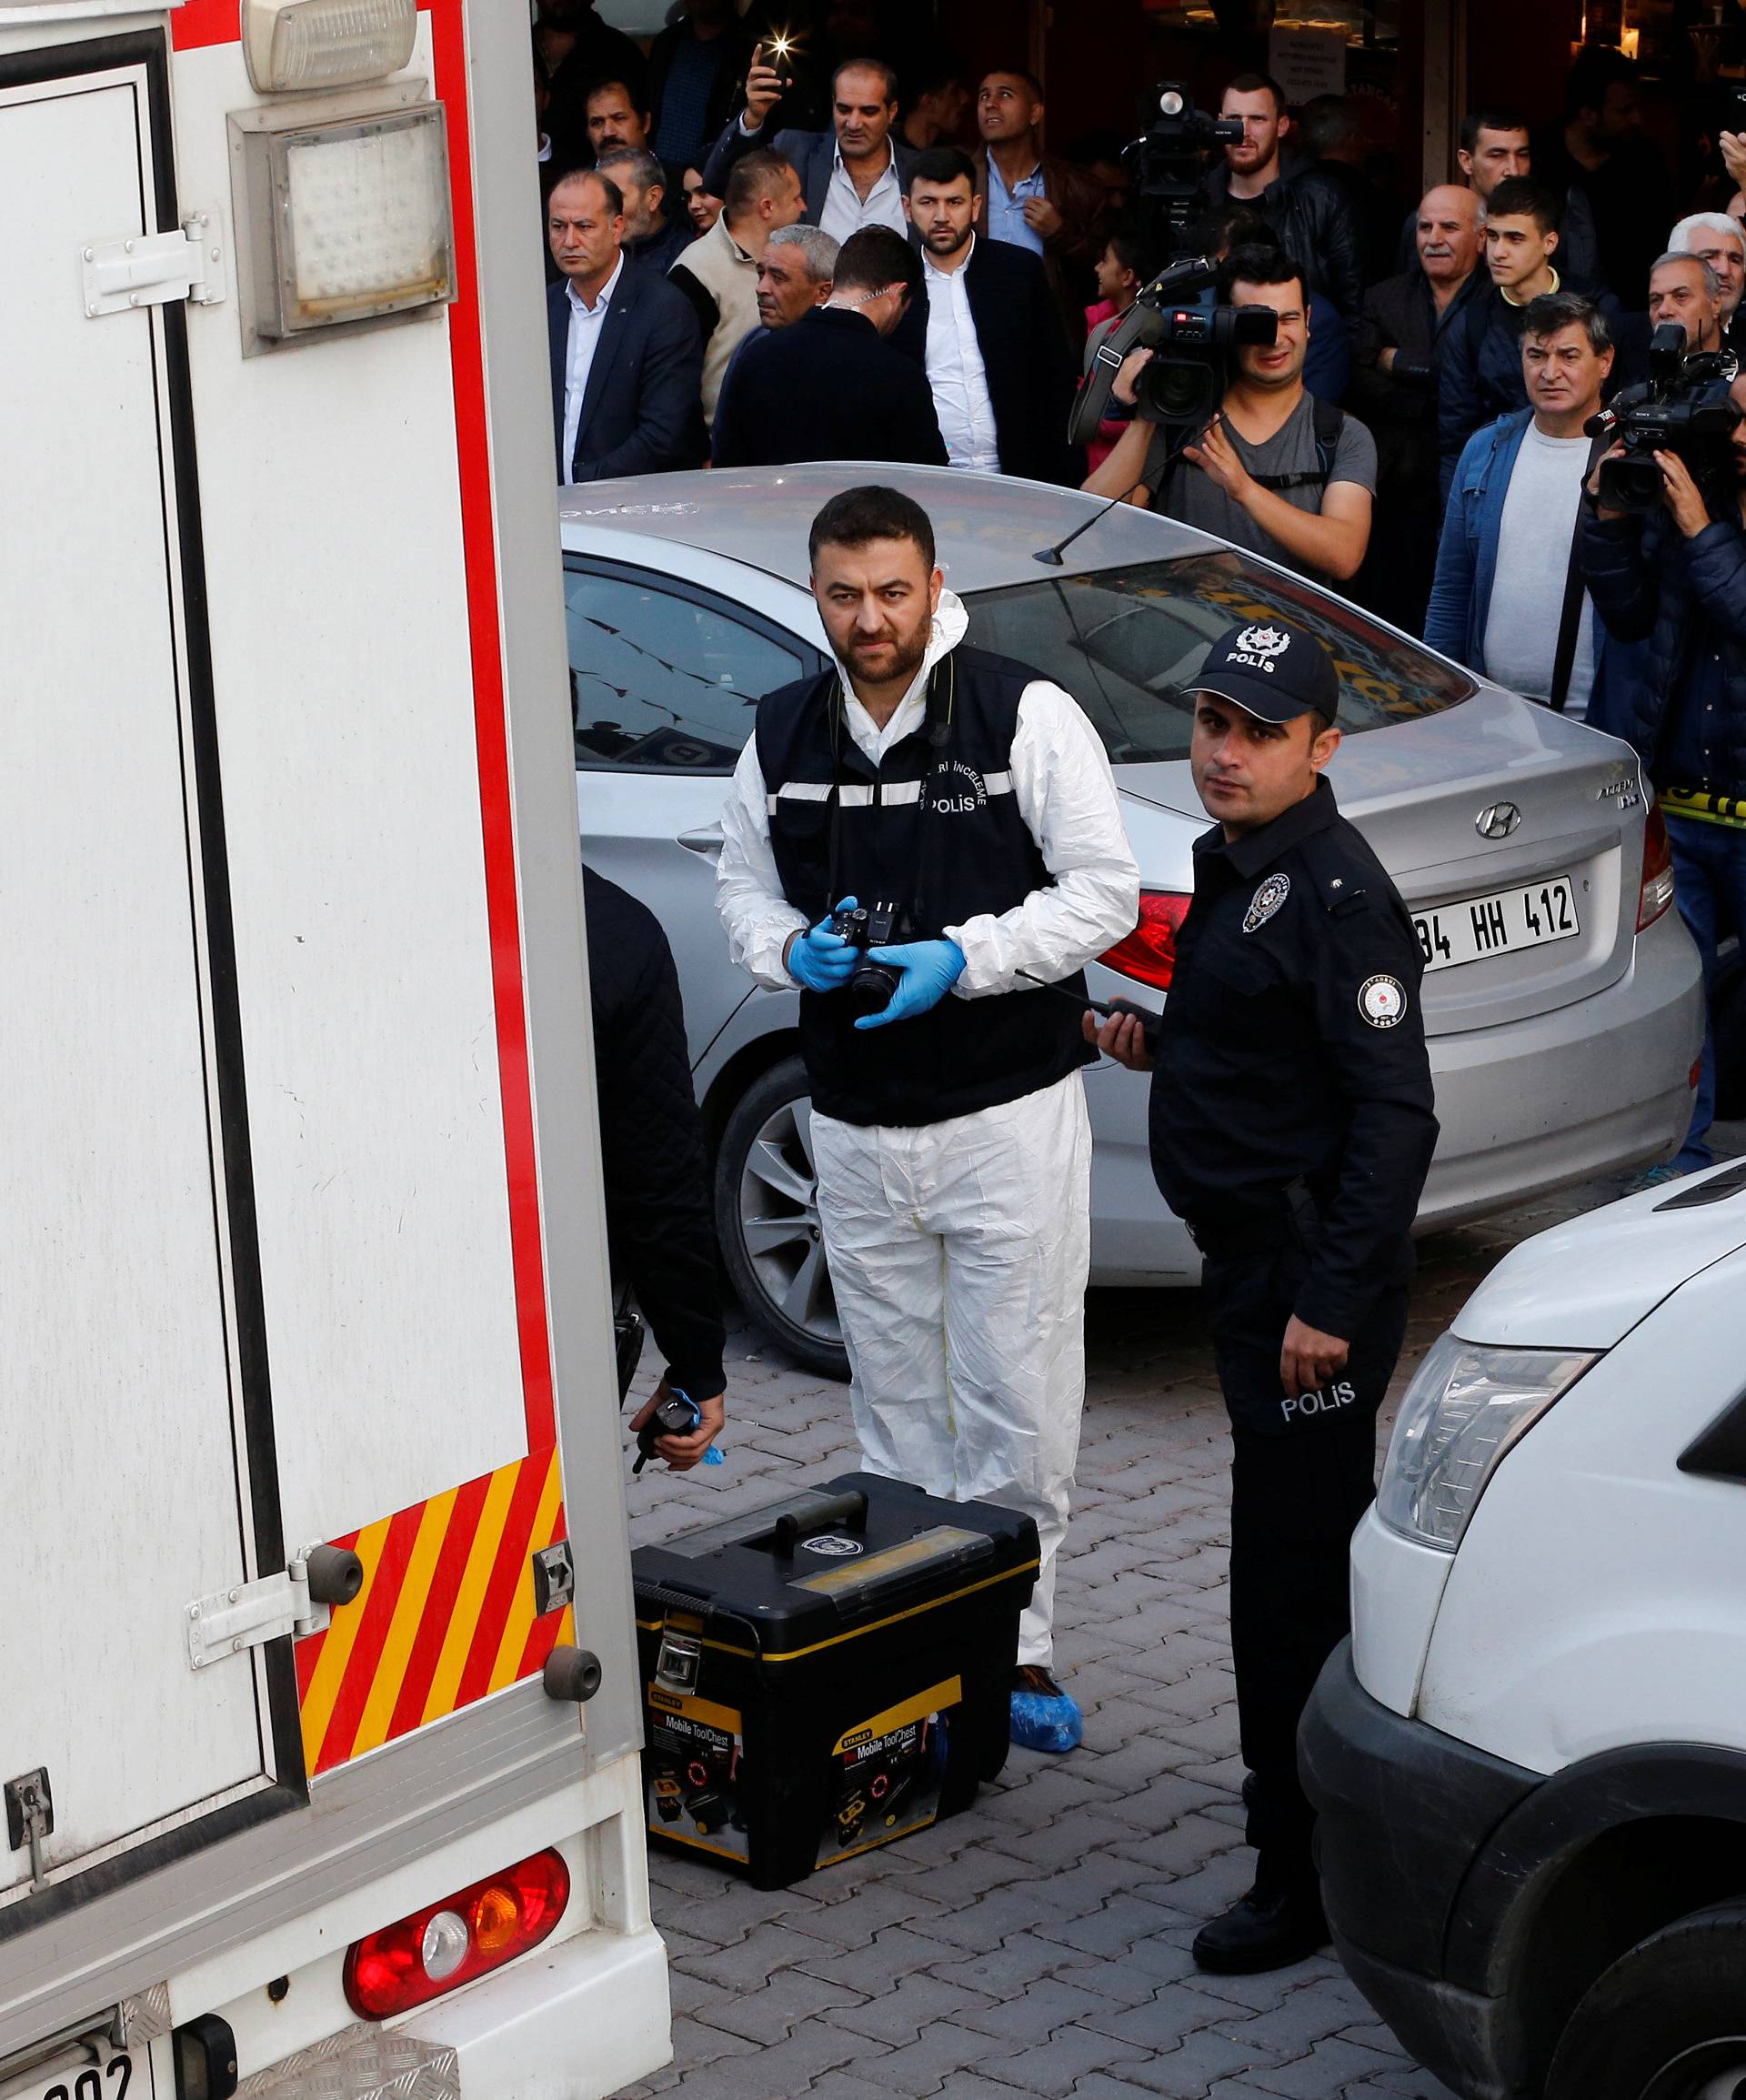 Turkish police and forensic experts arrive at a car park where a vehicle belonging to Saudi Arabia's consulate was found, in Istanbul